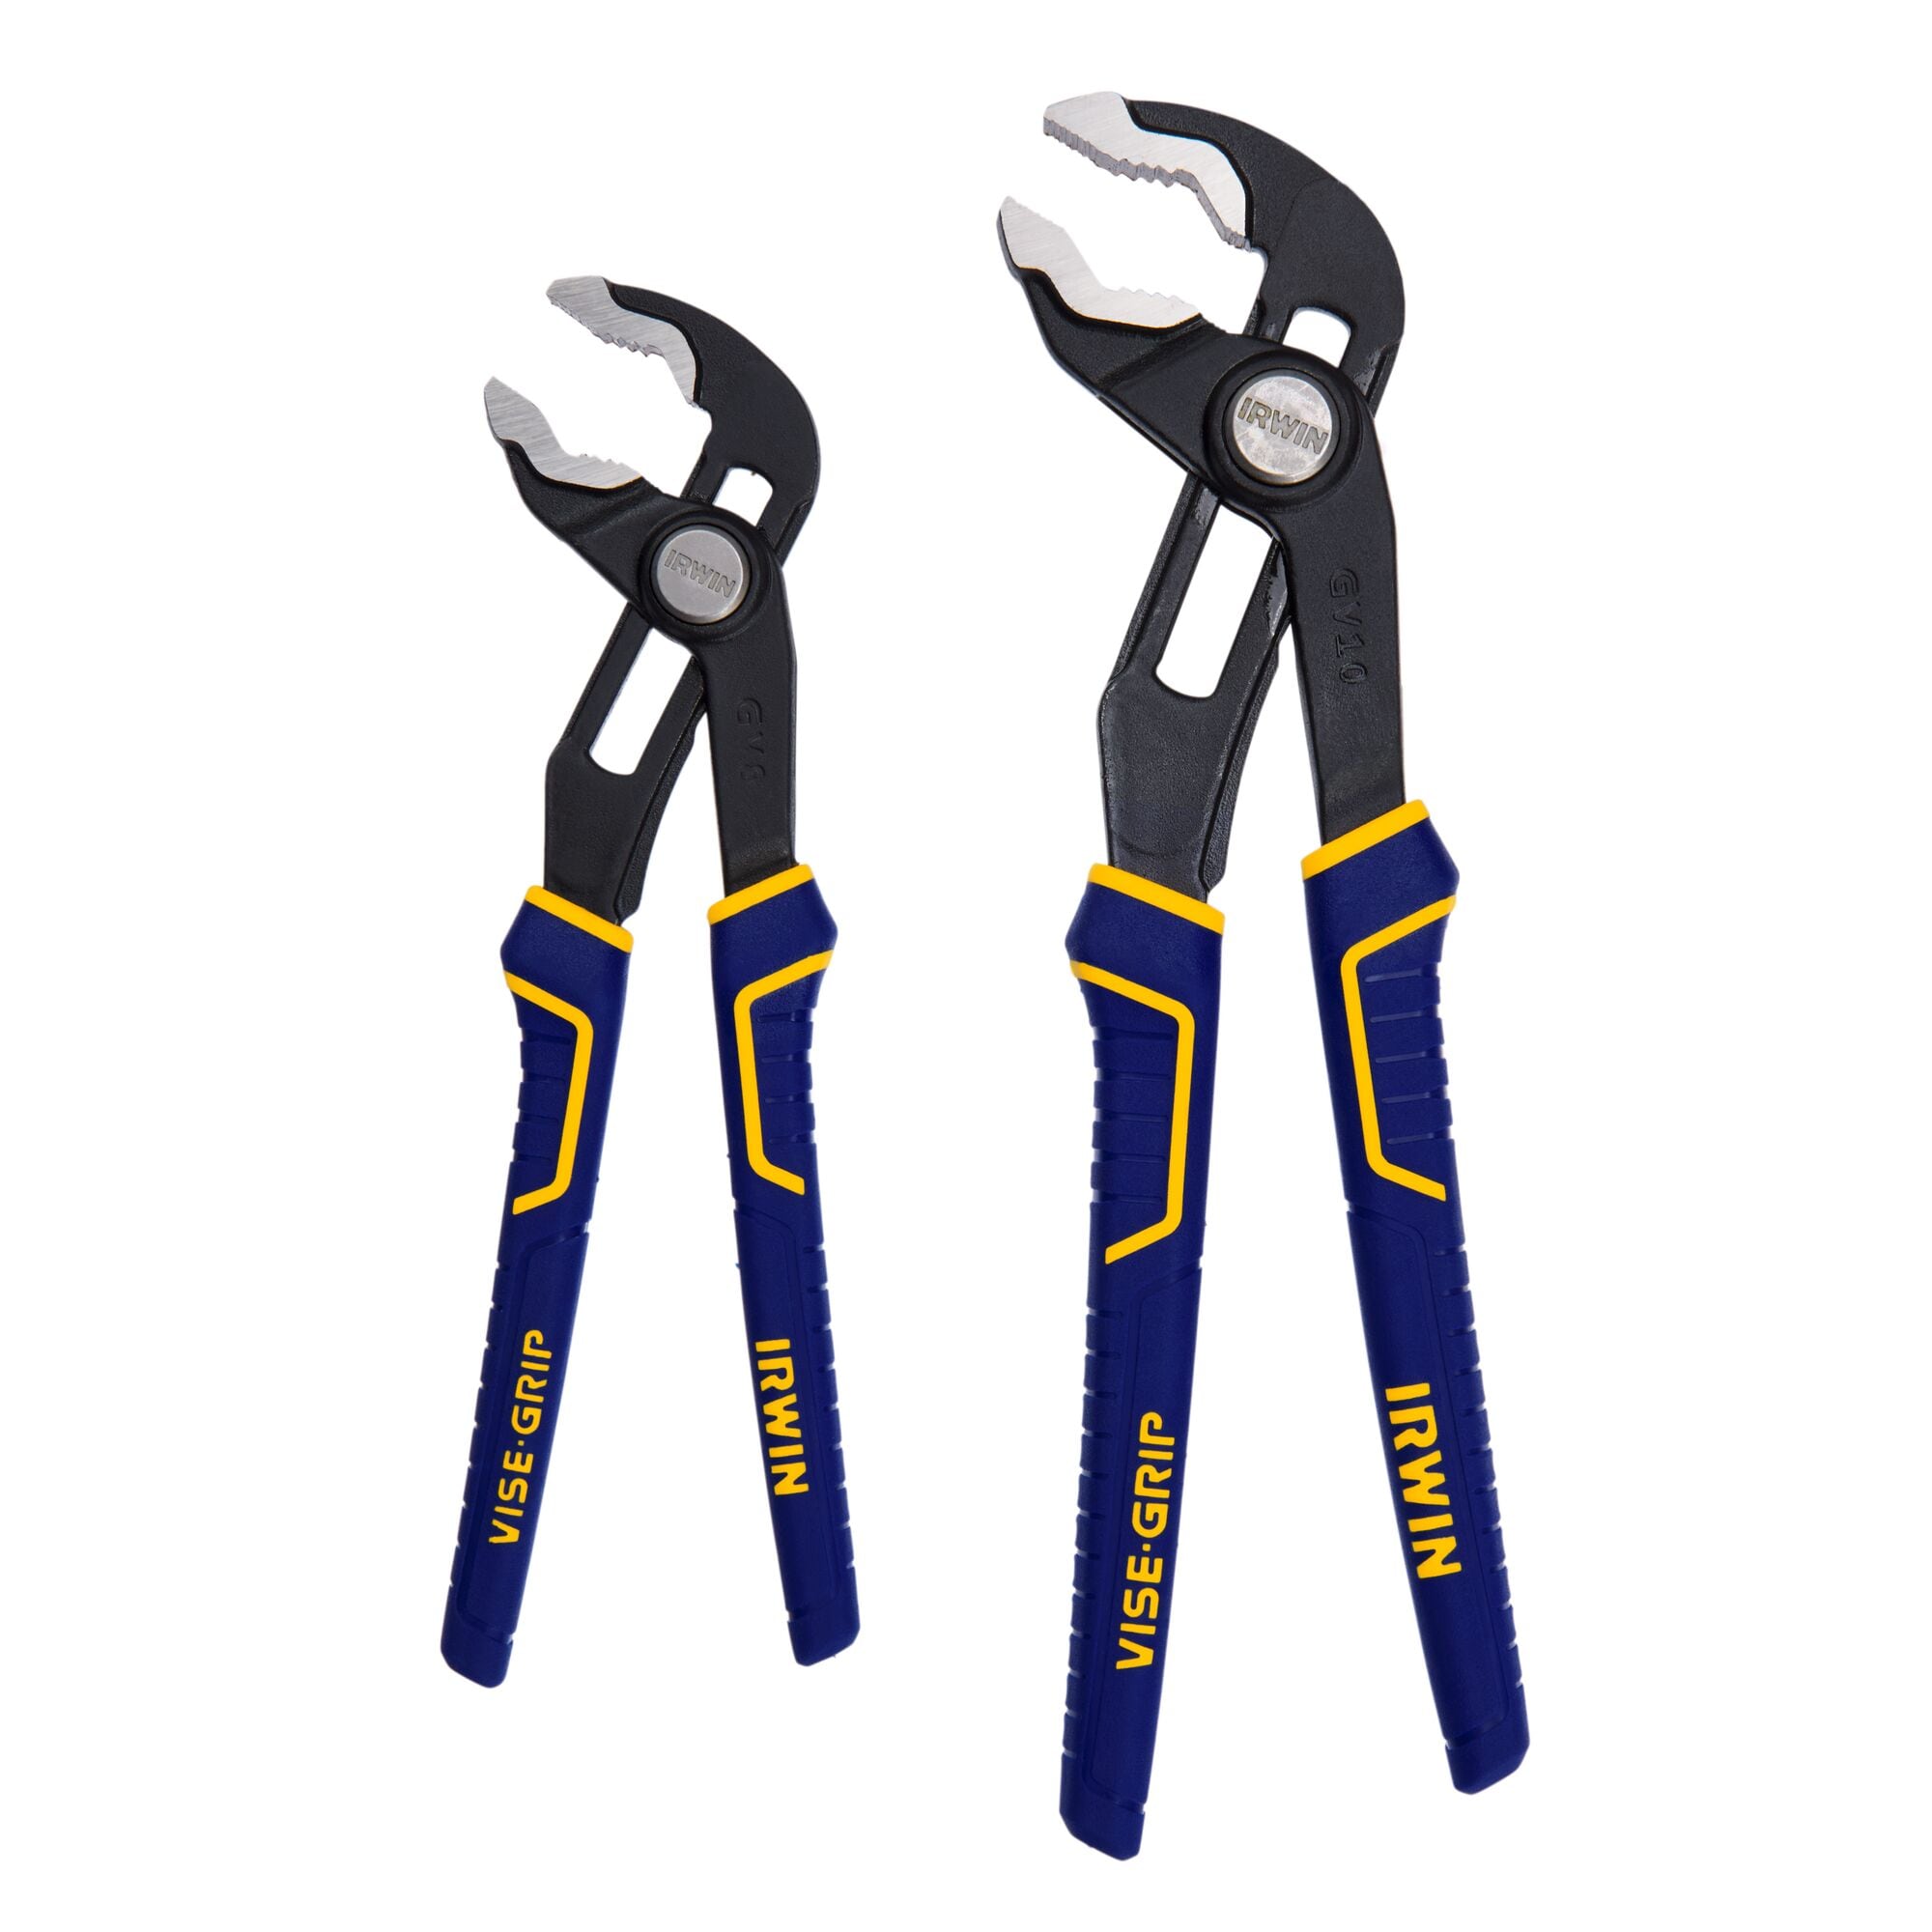 CRAFTSMAN 2-Pack Tongue and Groove Plier Set in the Plier Sets